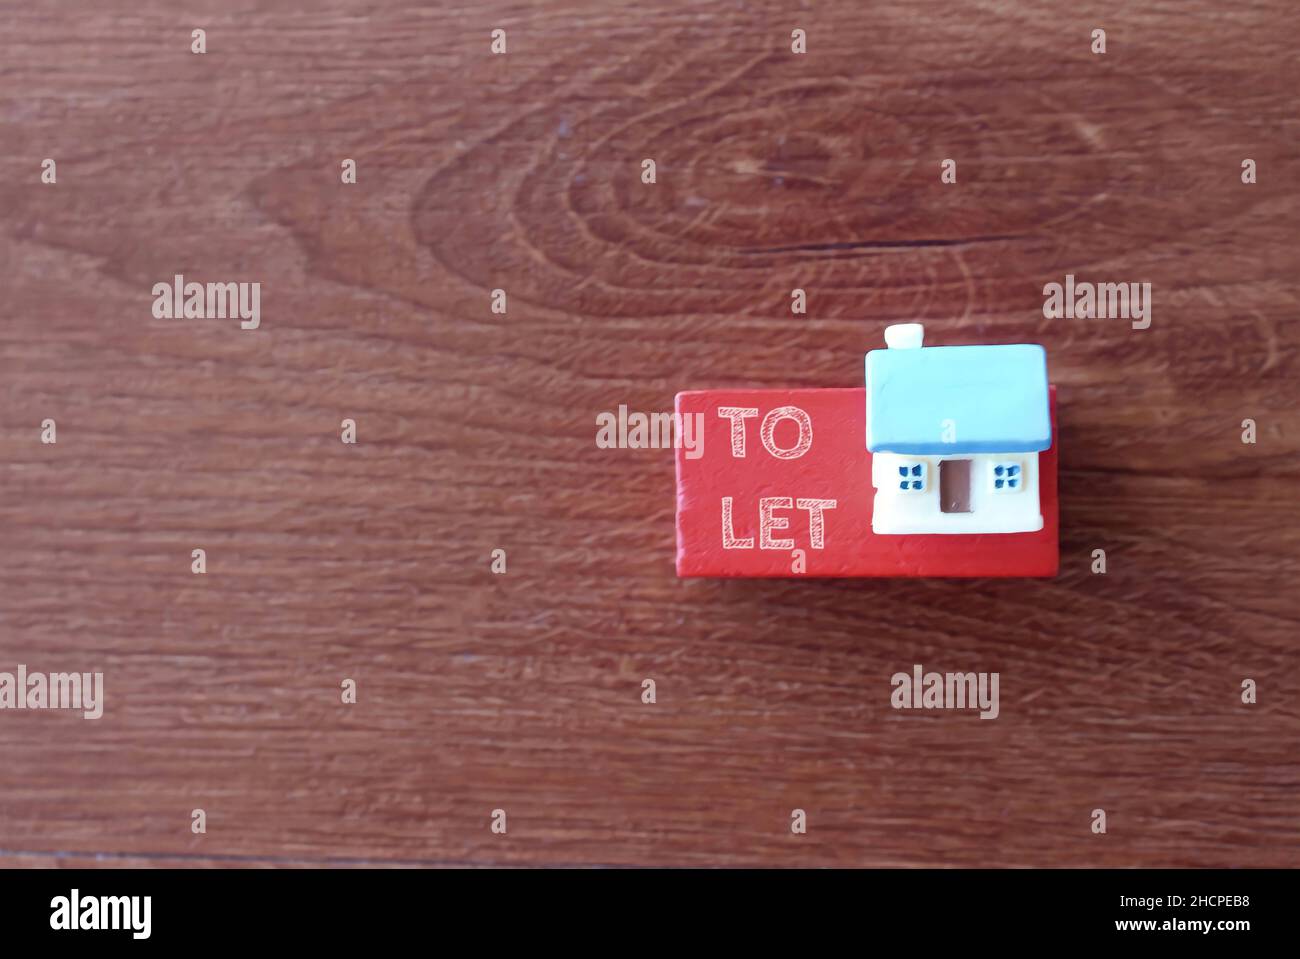 Selective focus image of miniature house and text TO LET. Real estate and property concept. Stock Photo